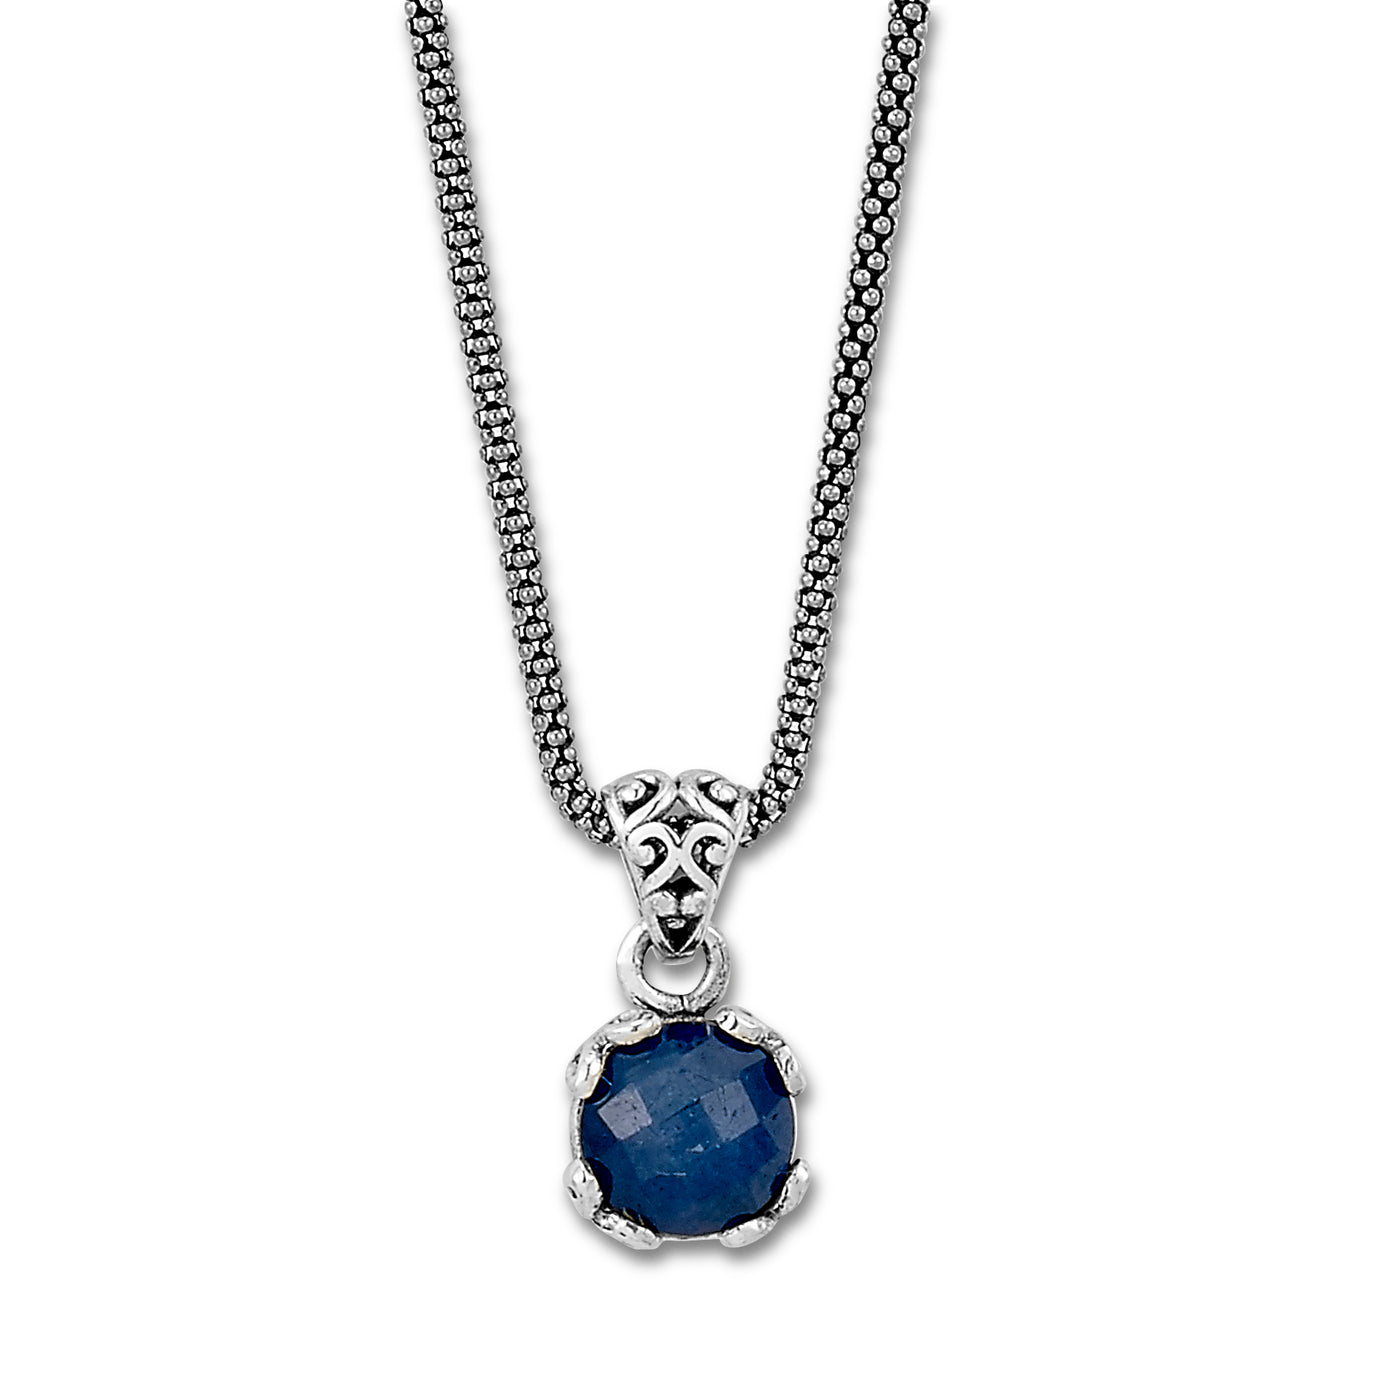 SS 7MM ROUND BLUE SAPPHIRE PENDANT ON CHAIN